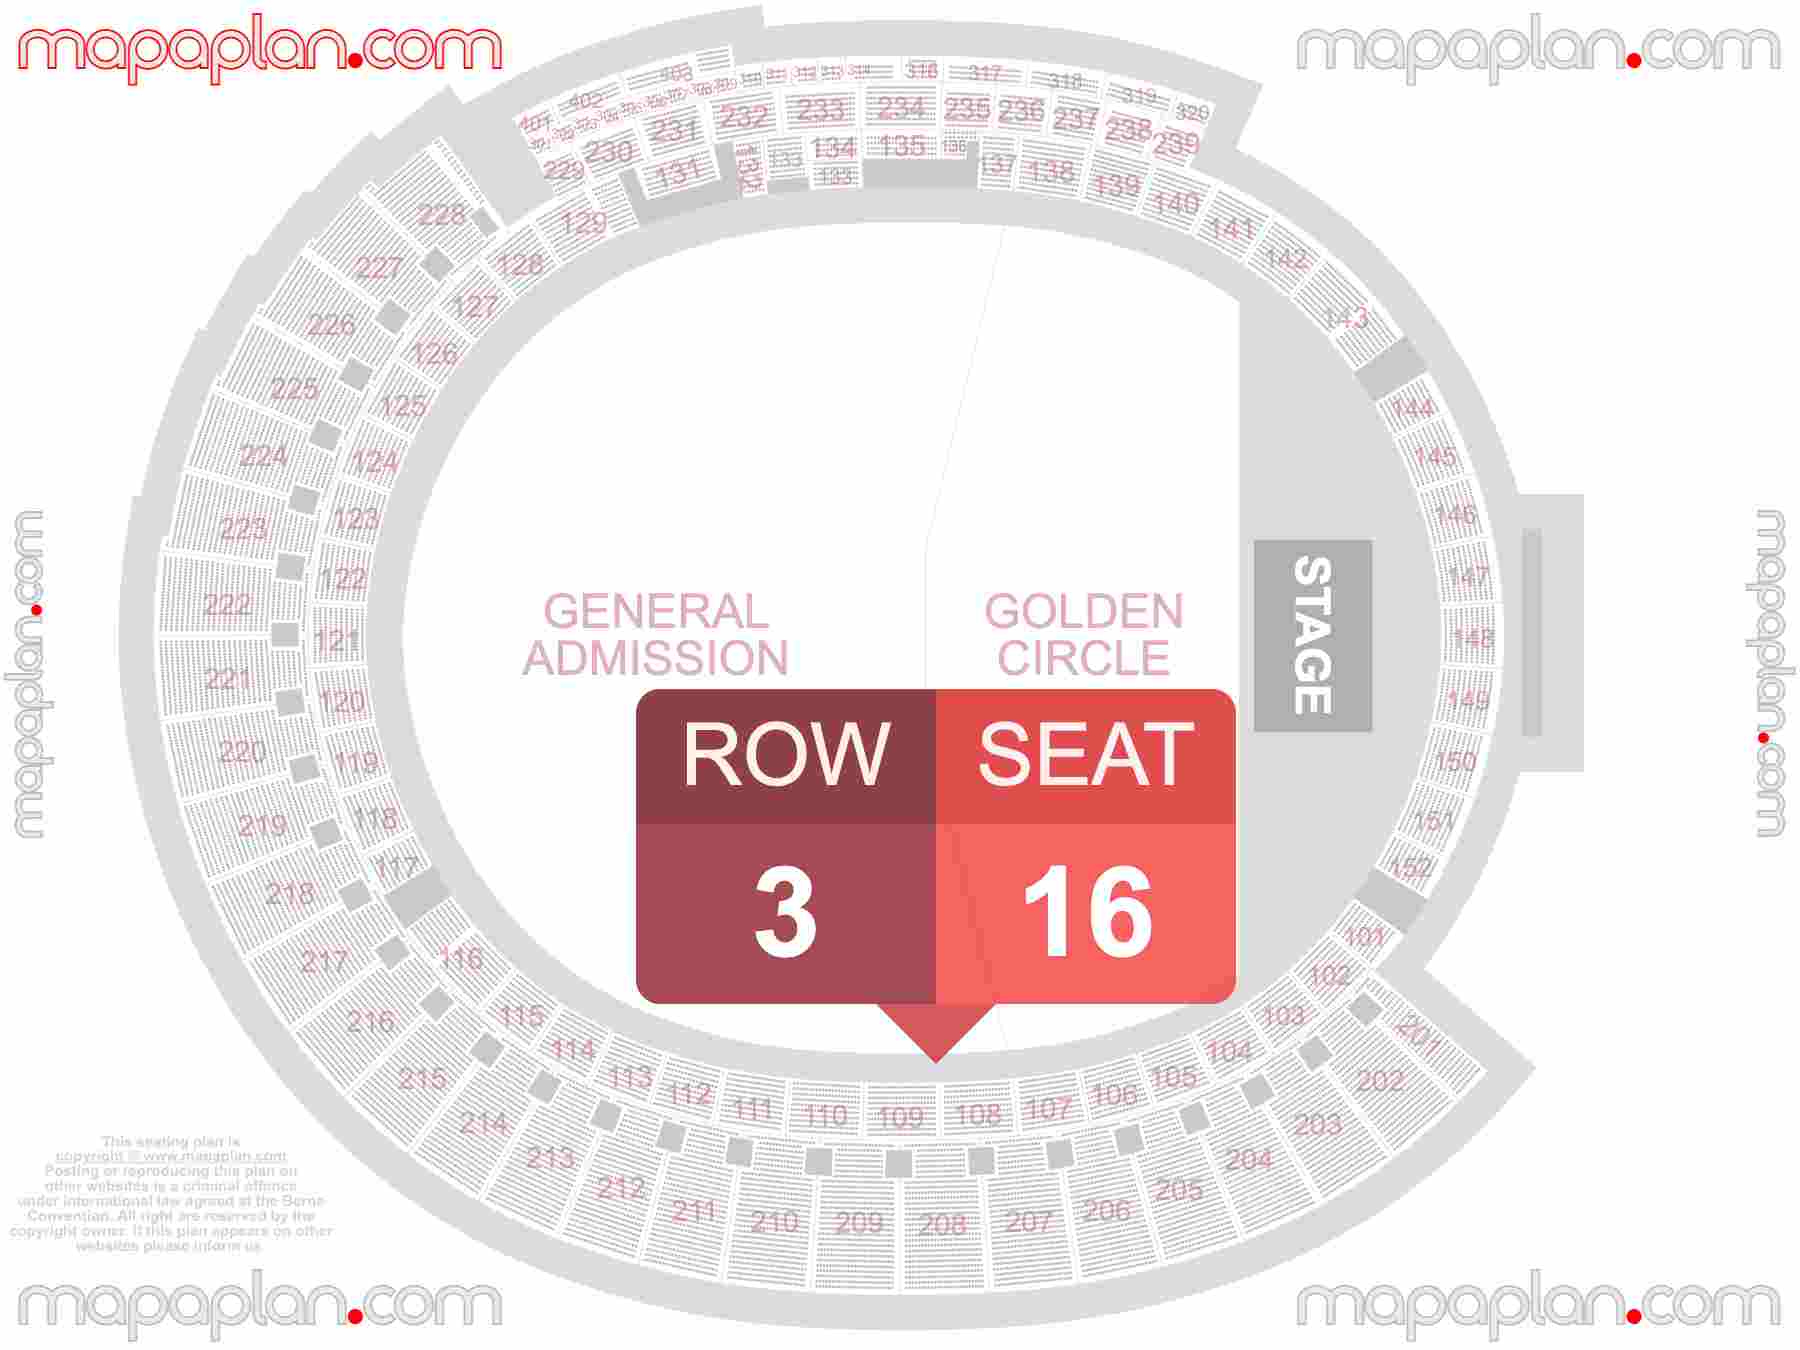 Carrara People First Stadium seating map Concert detailed seat numbers and row numbering map with interactive map plan layout